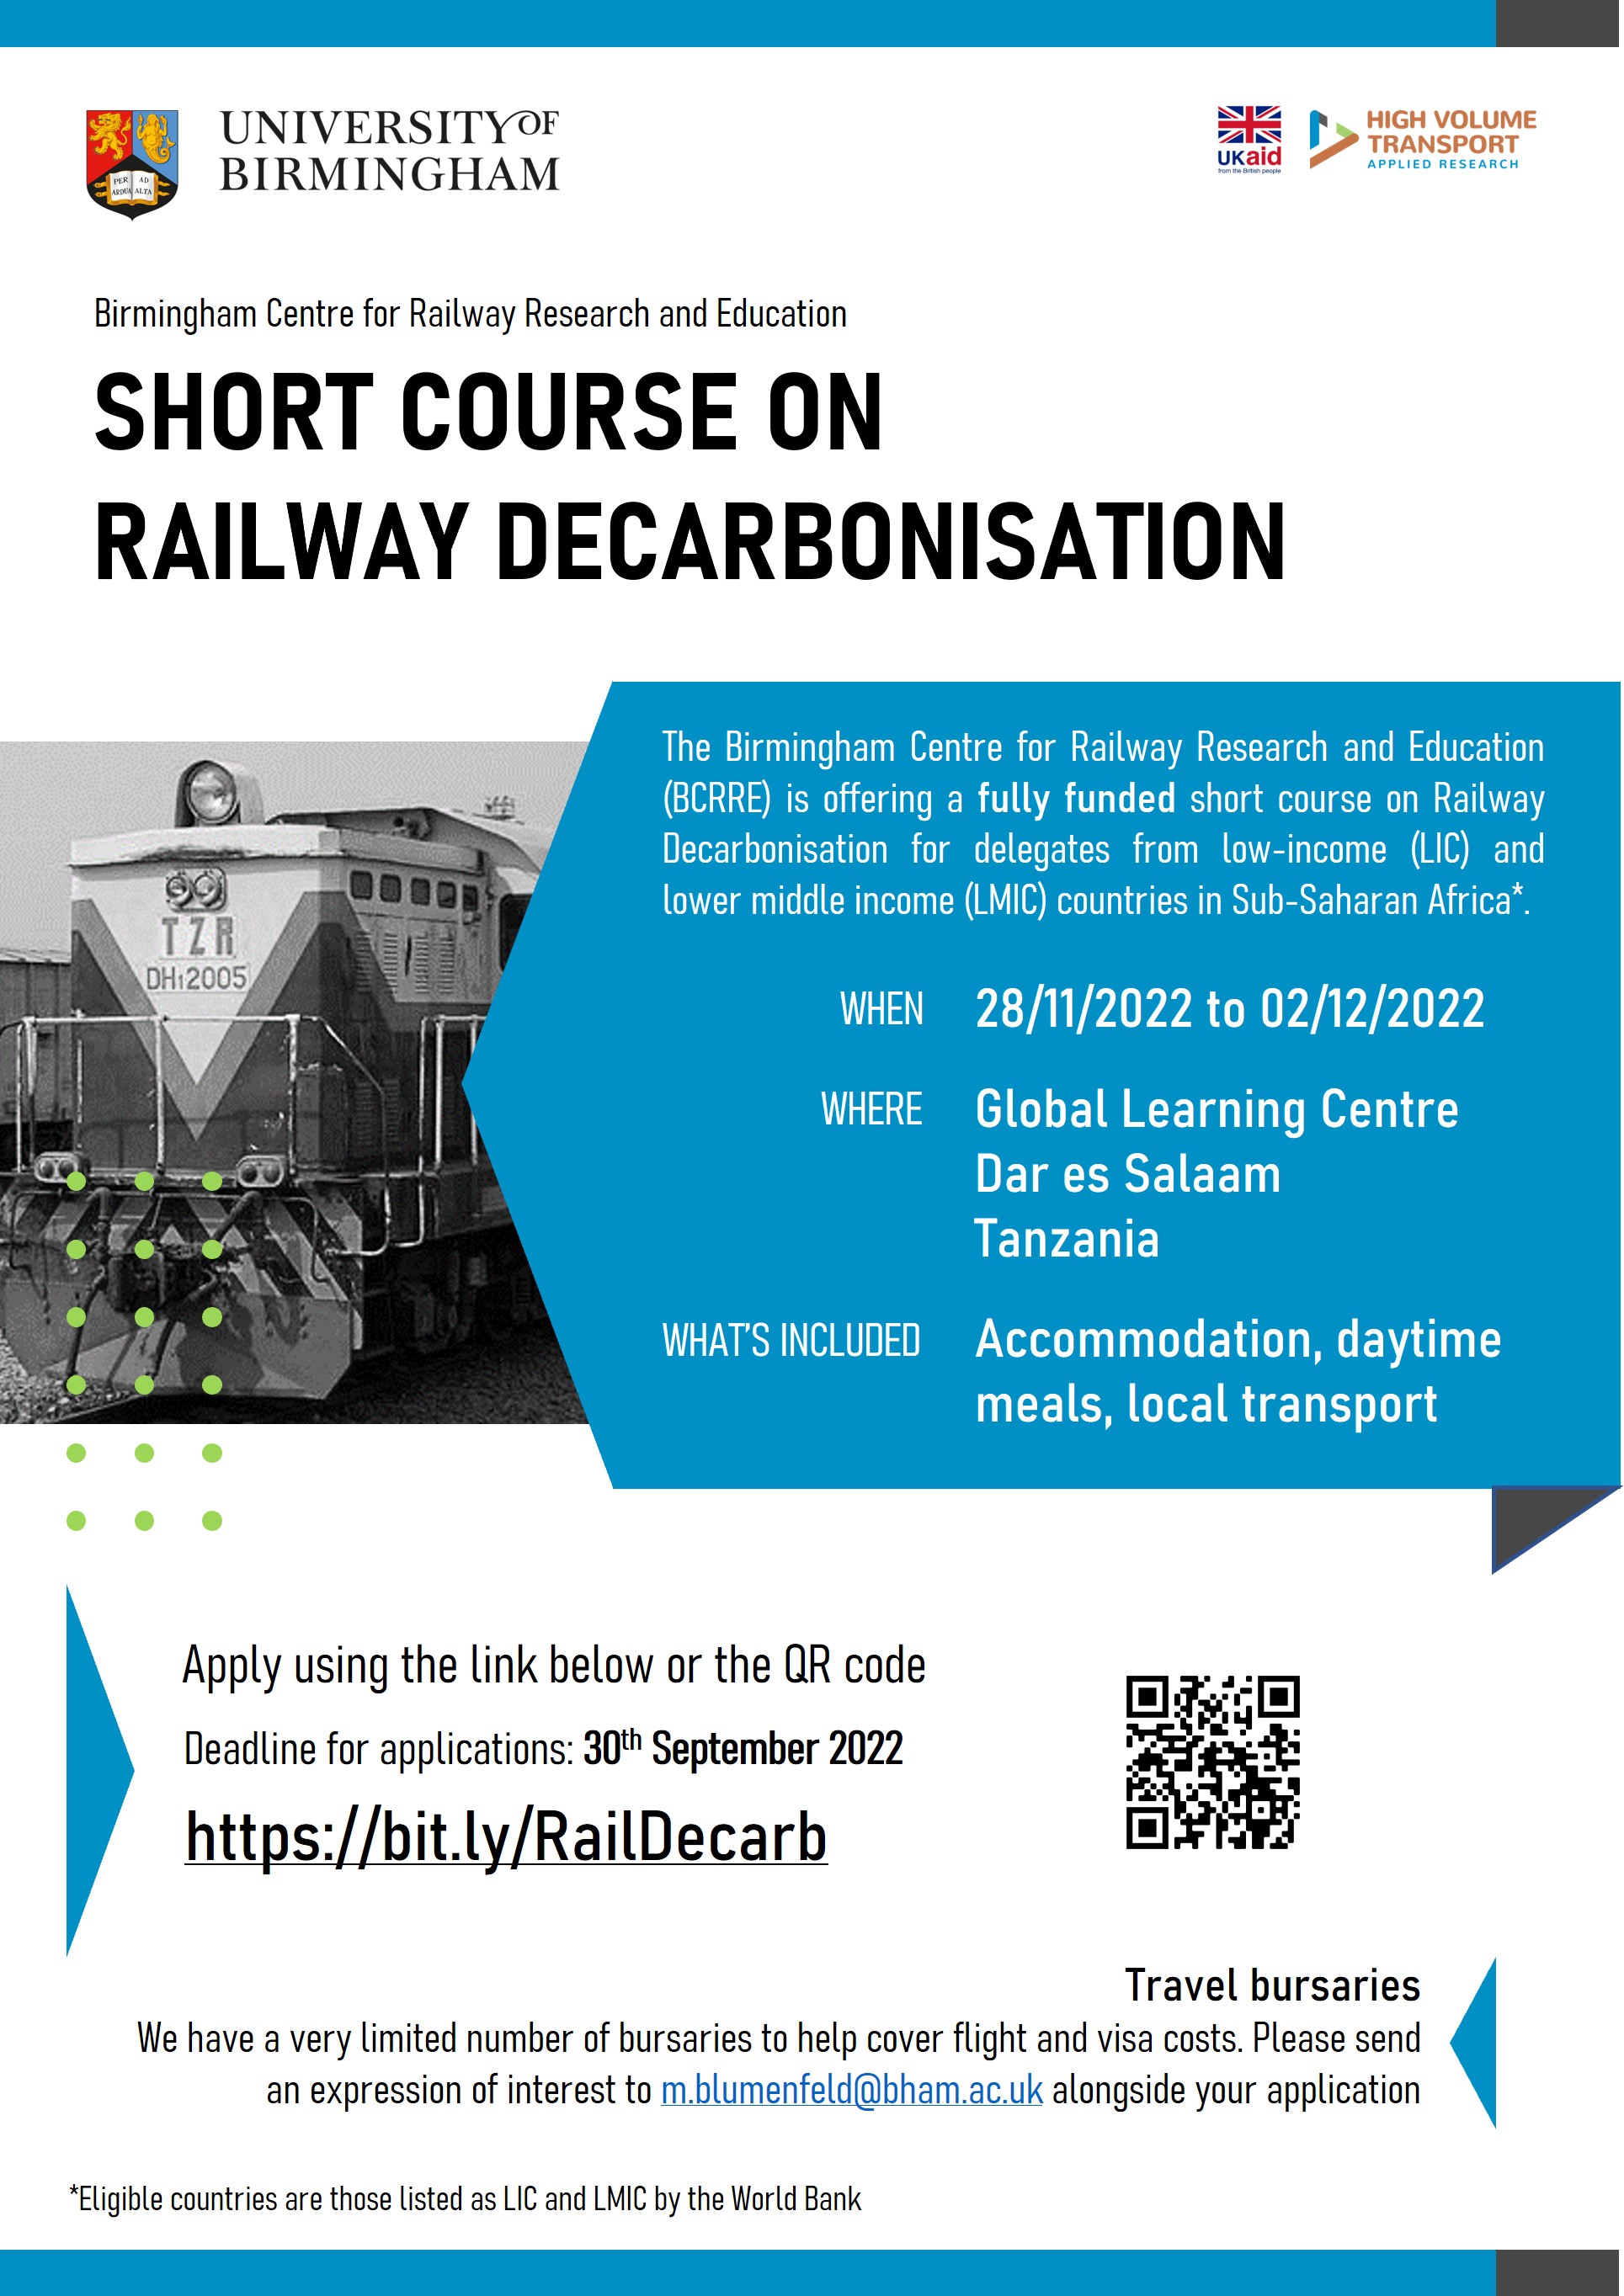 Railway Decarbonisation Course to Hold in Tanzania- Birmingham Centre for Railway Research